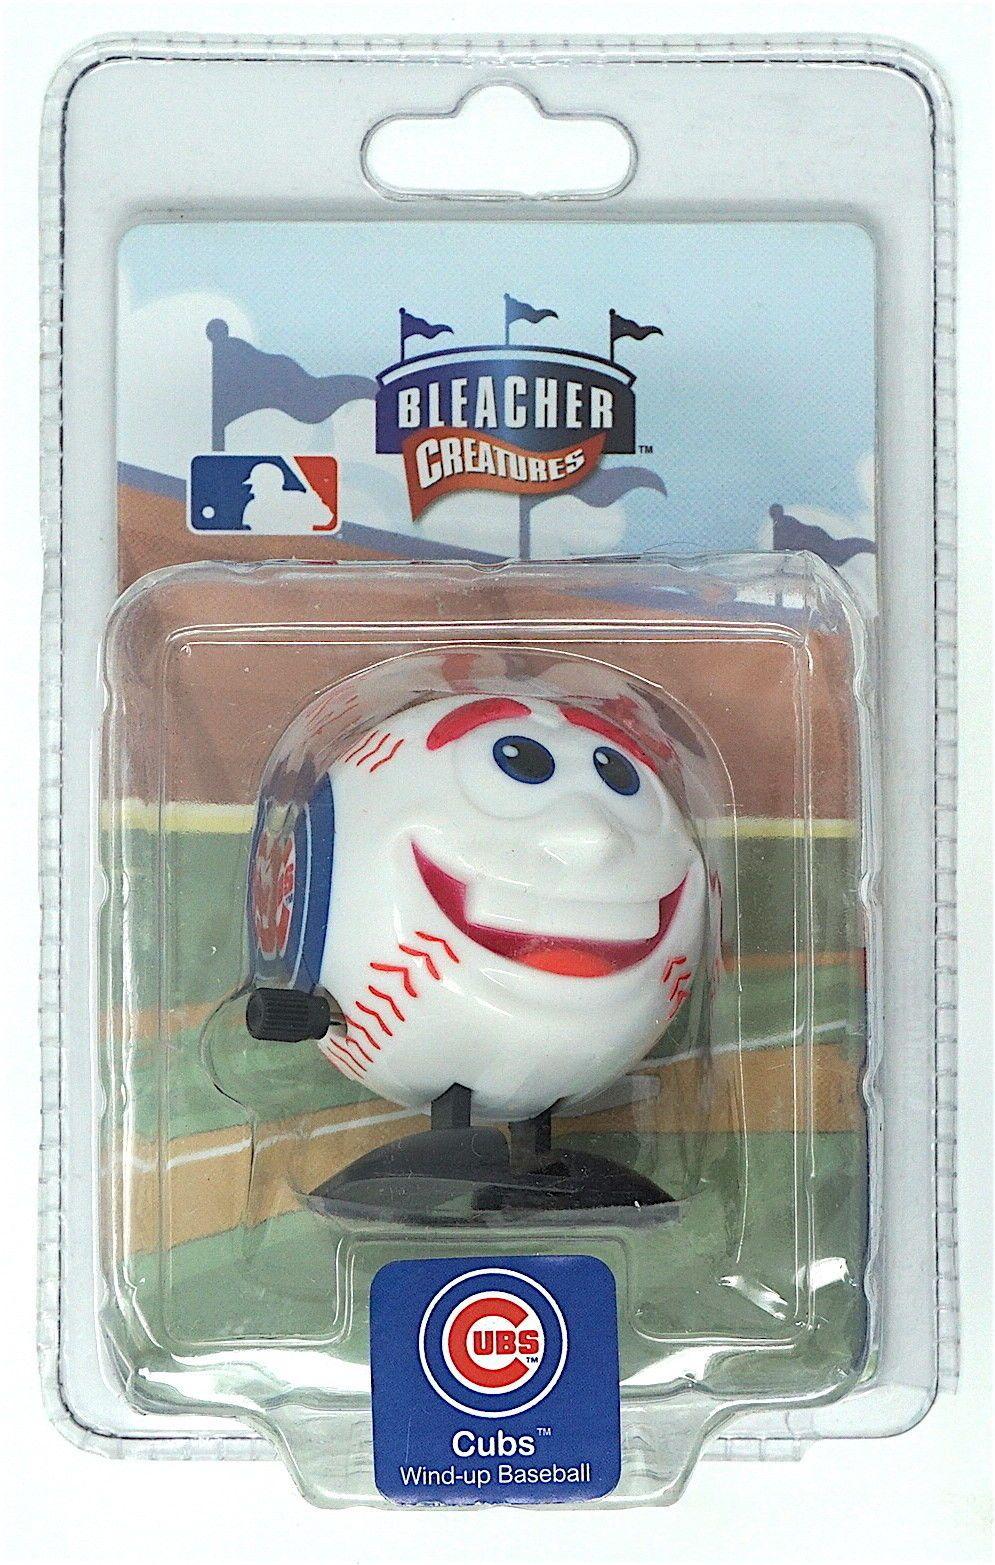 Creatures of the Wind Logo - Bleacher Creatures MLB Chicago Cubs League Wind-up Baseball Toy | eBay